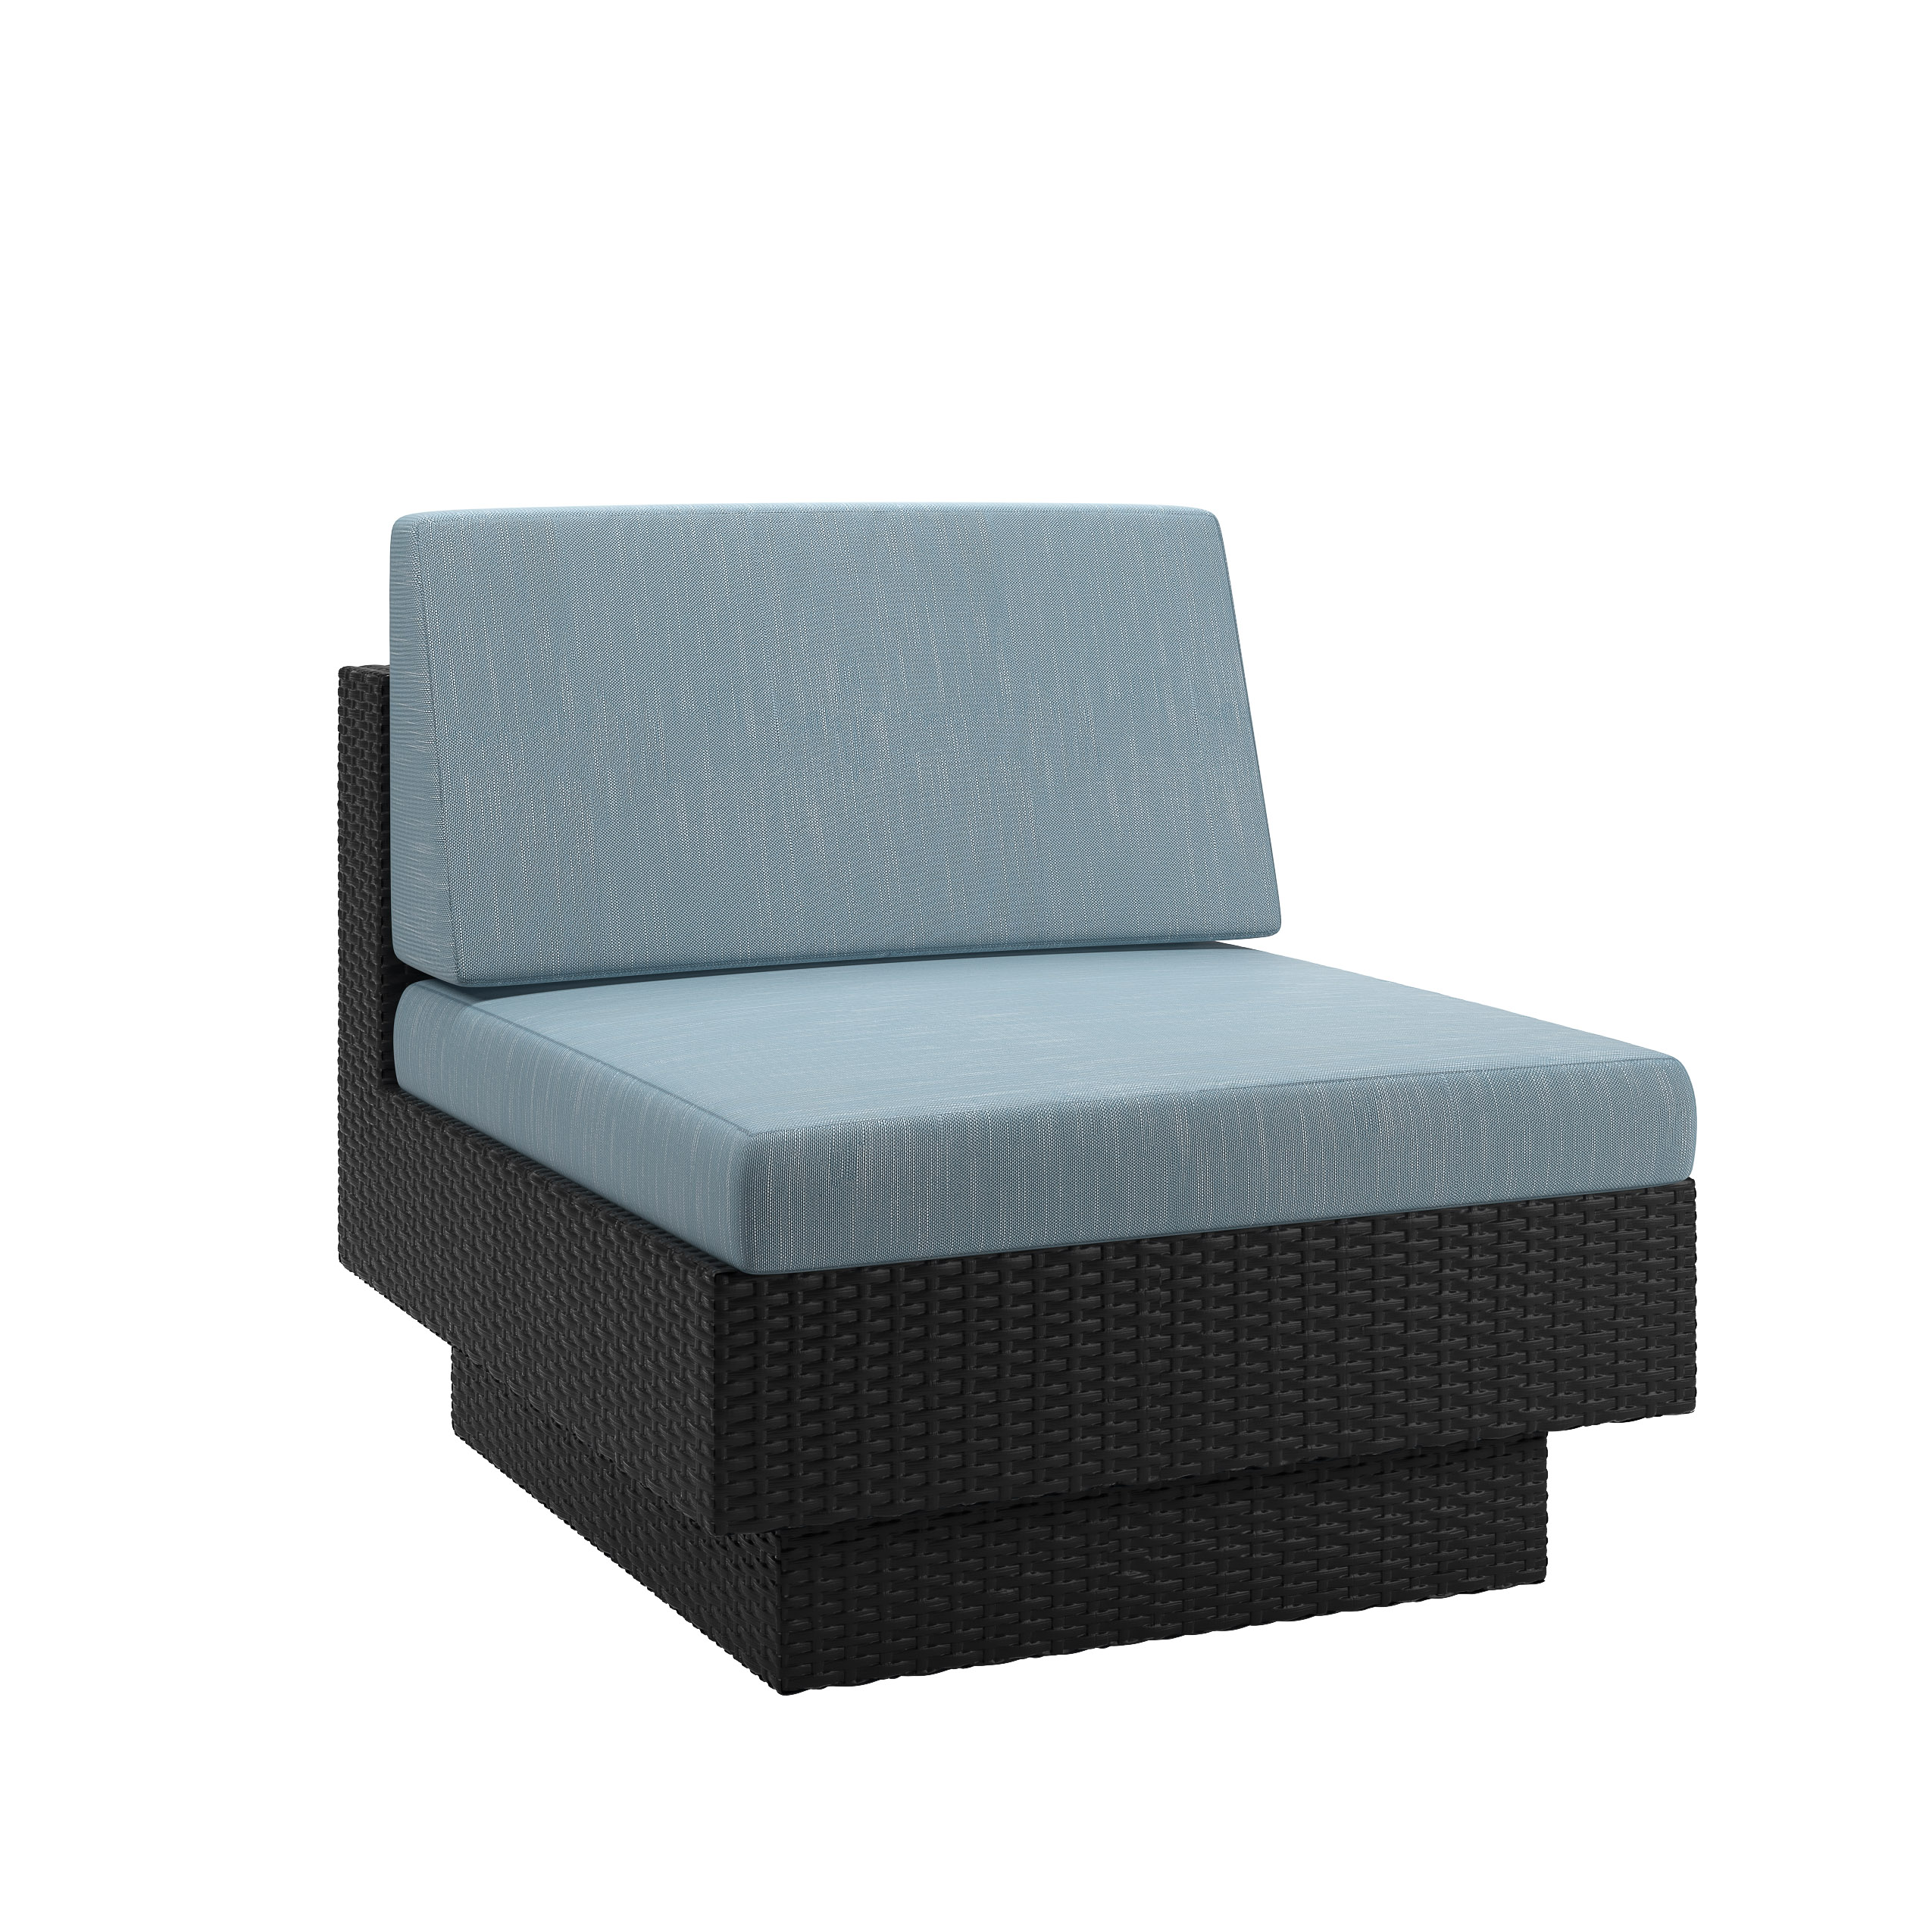 CorLiving Patio Middle Seat in Textured Black Weave with Teal Cushions - image 1 of 3